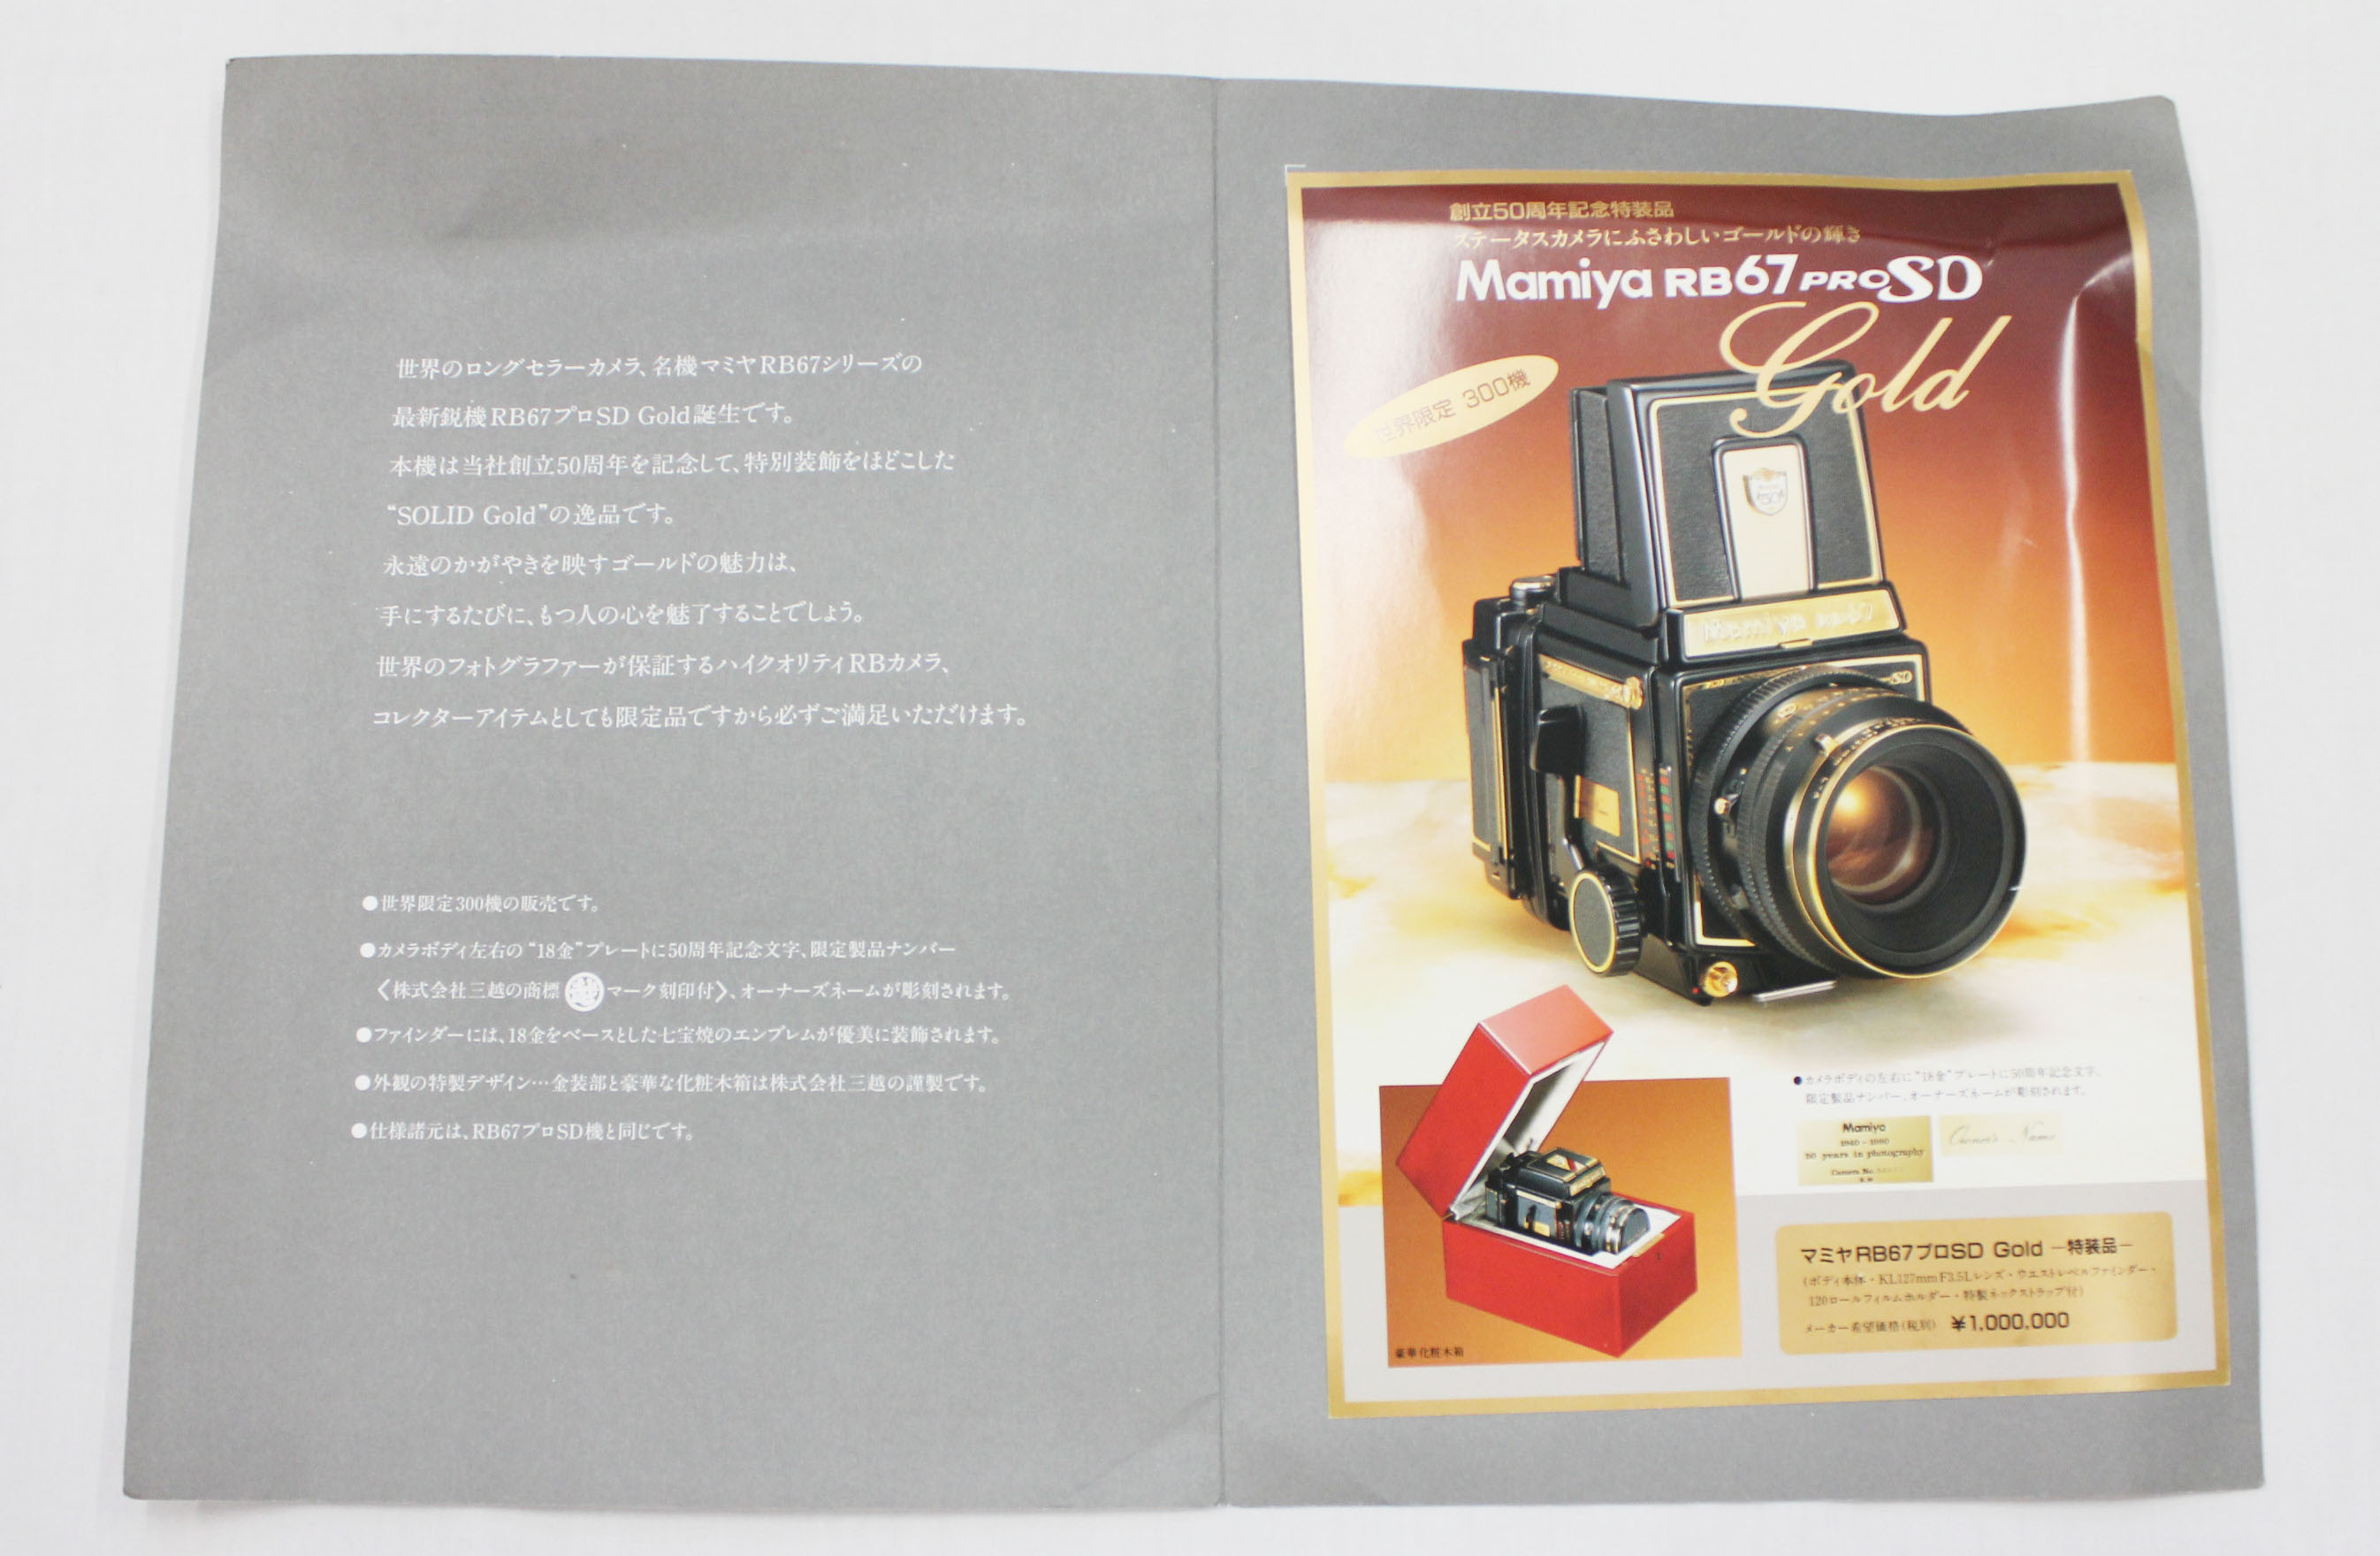 Mamiya RB67 Pro SD Gold K/L 127mm F/3.5 50 Years Limited Edition of 300 from Japan Photo 25